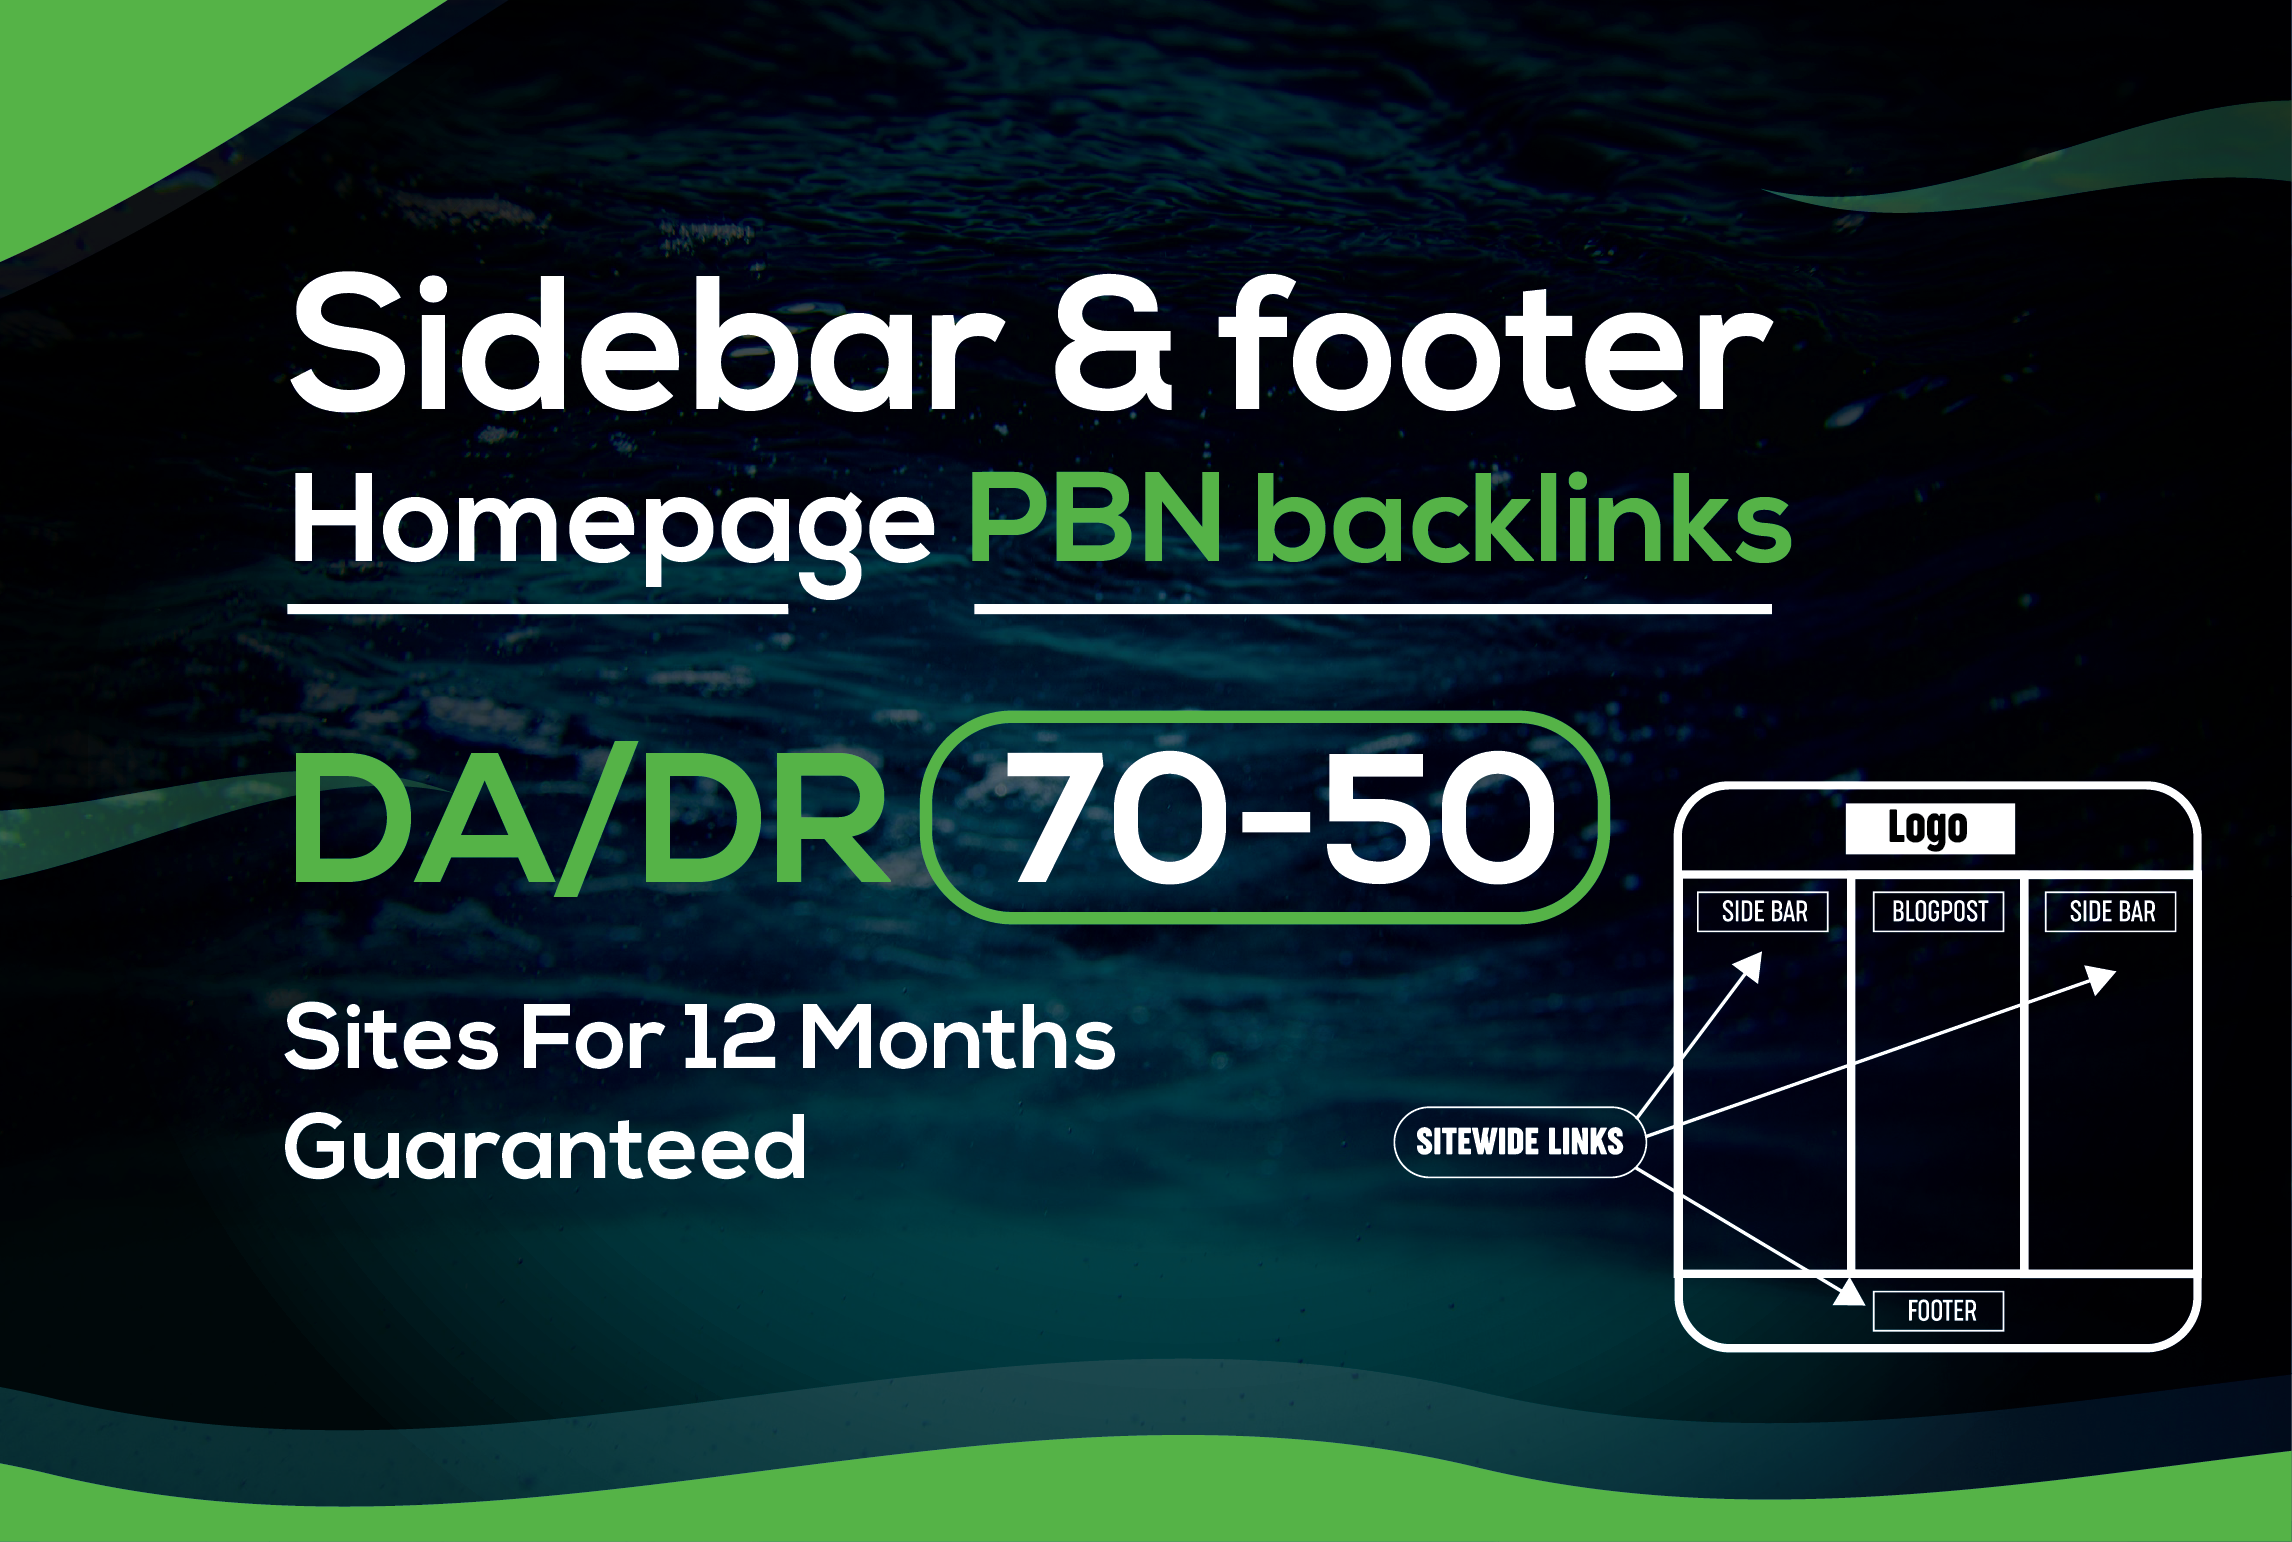  Build 10 Sidebar & footer Homepage PBN backlinks DA/DR 70-50 Sites For 12 Months Guaranteed